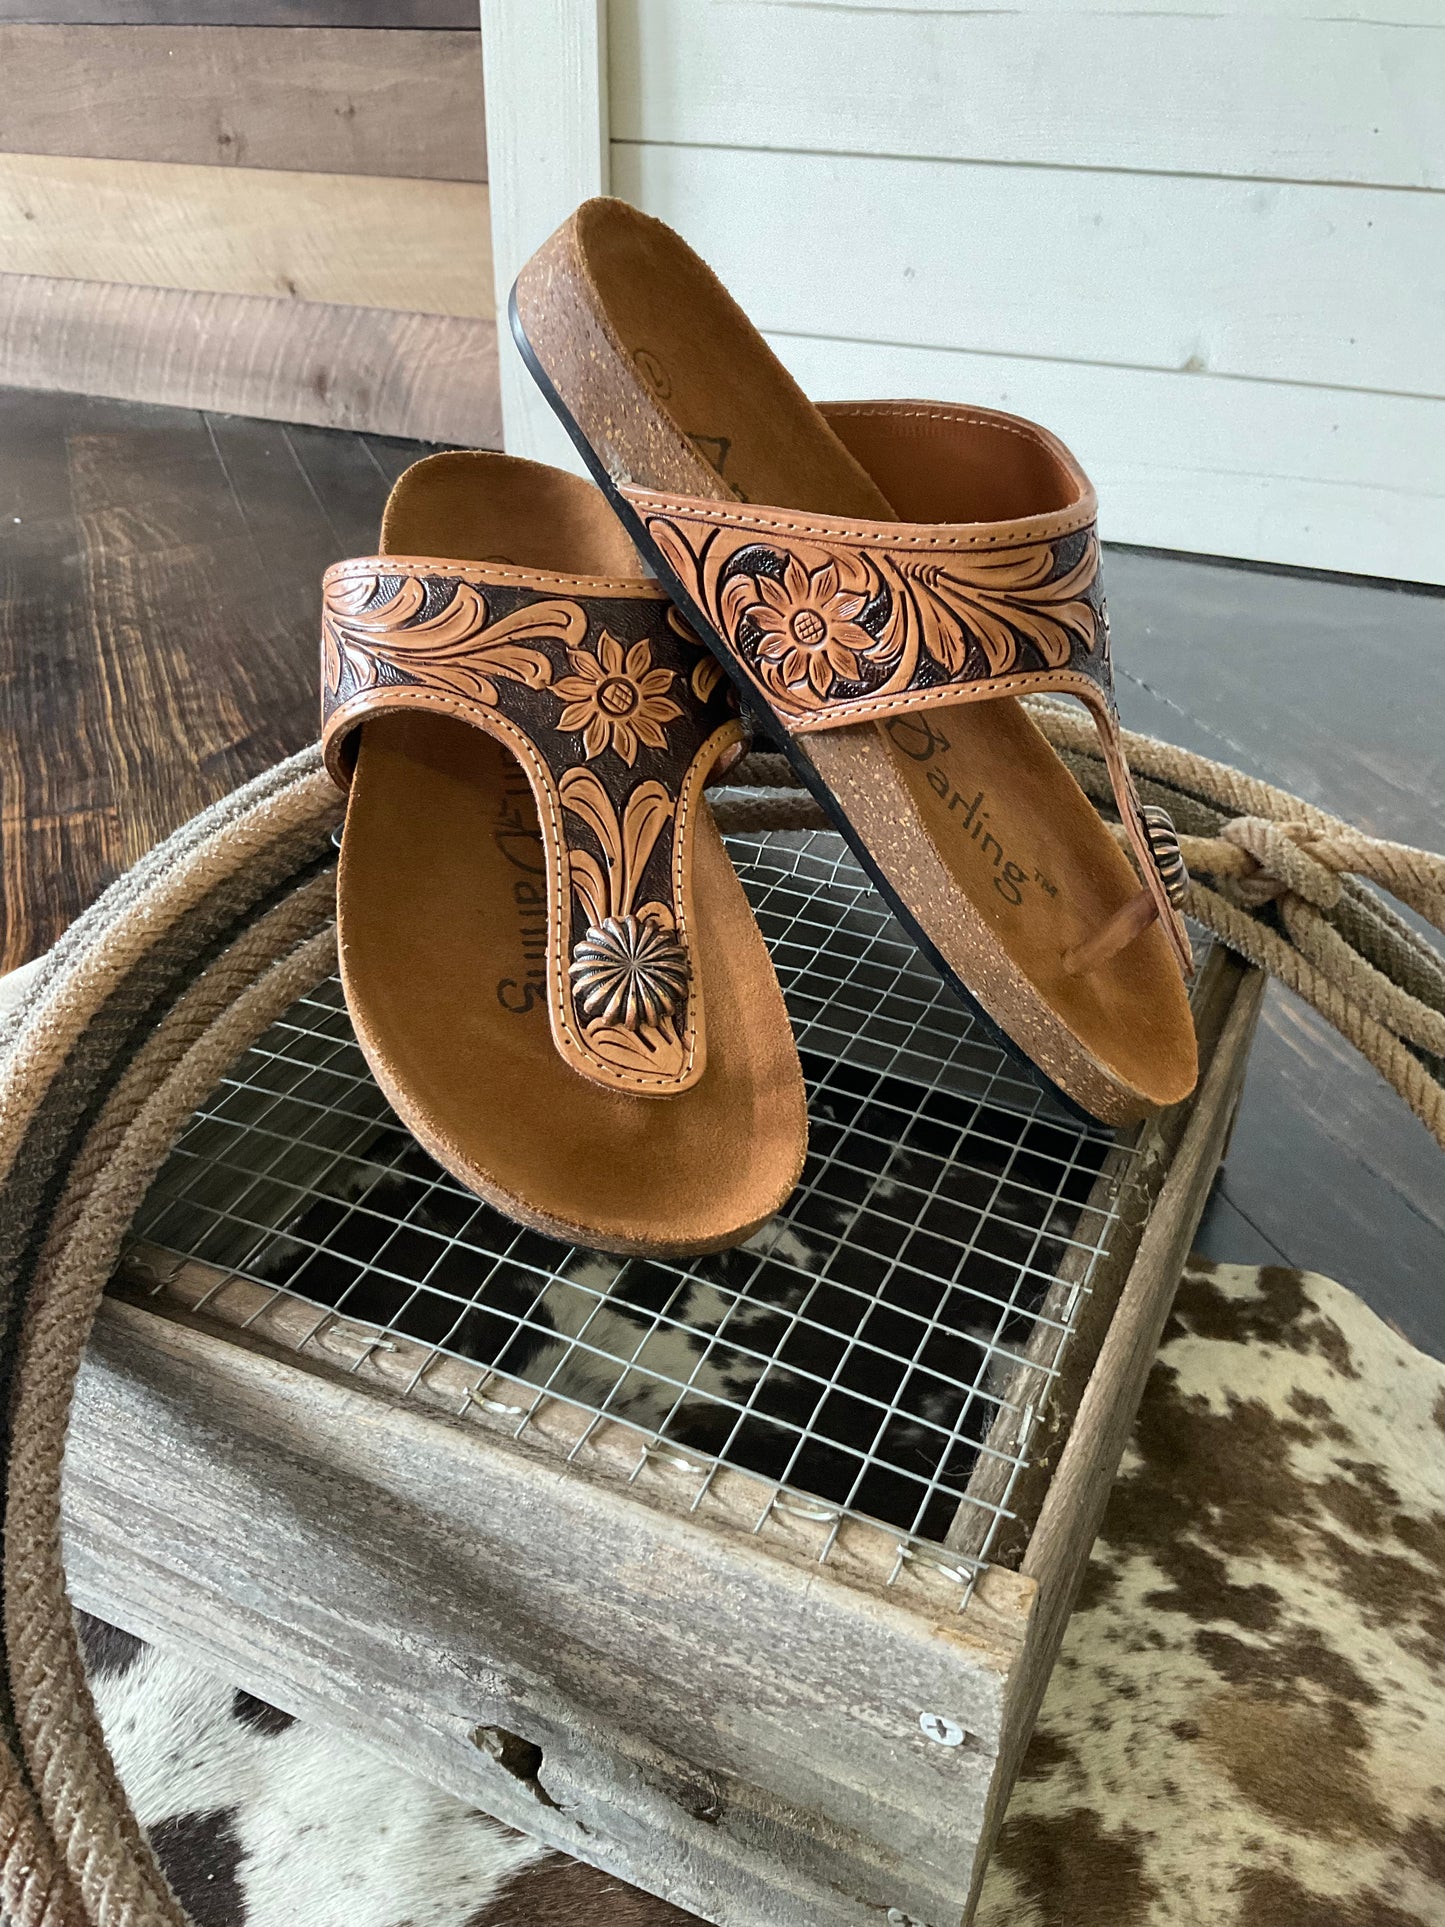 The Callie Tooled Leather Sandals